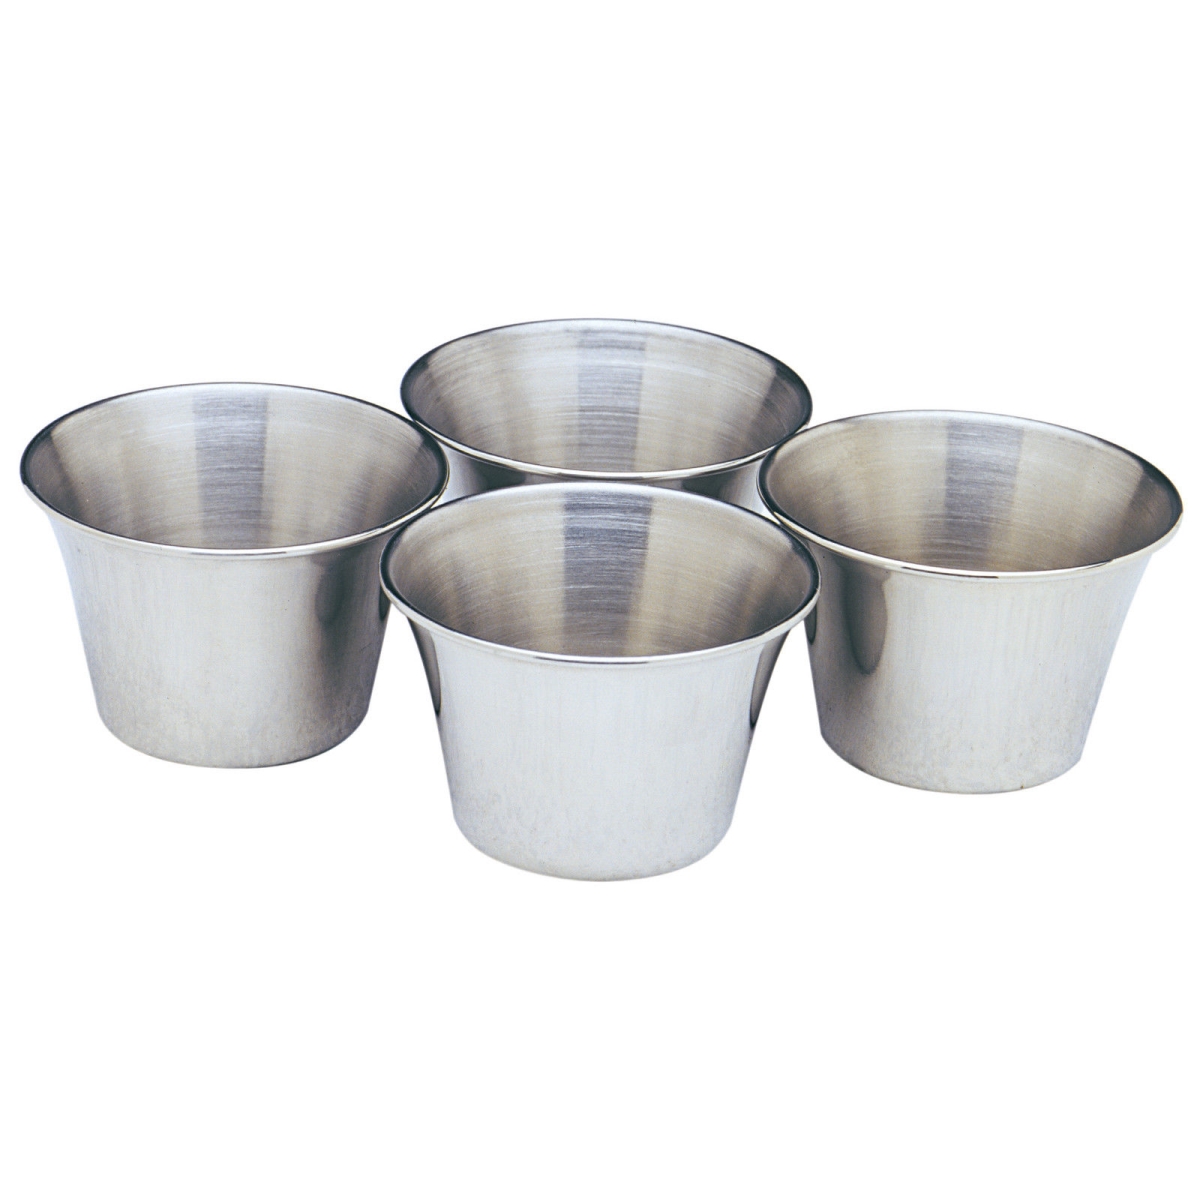 208 Sauce Cups Stainless Steel, 4 Pieces